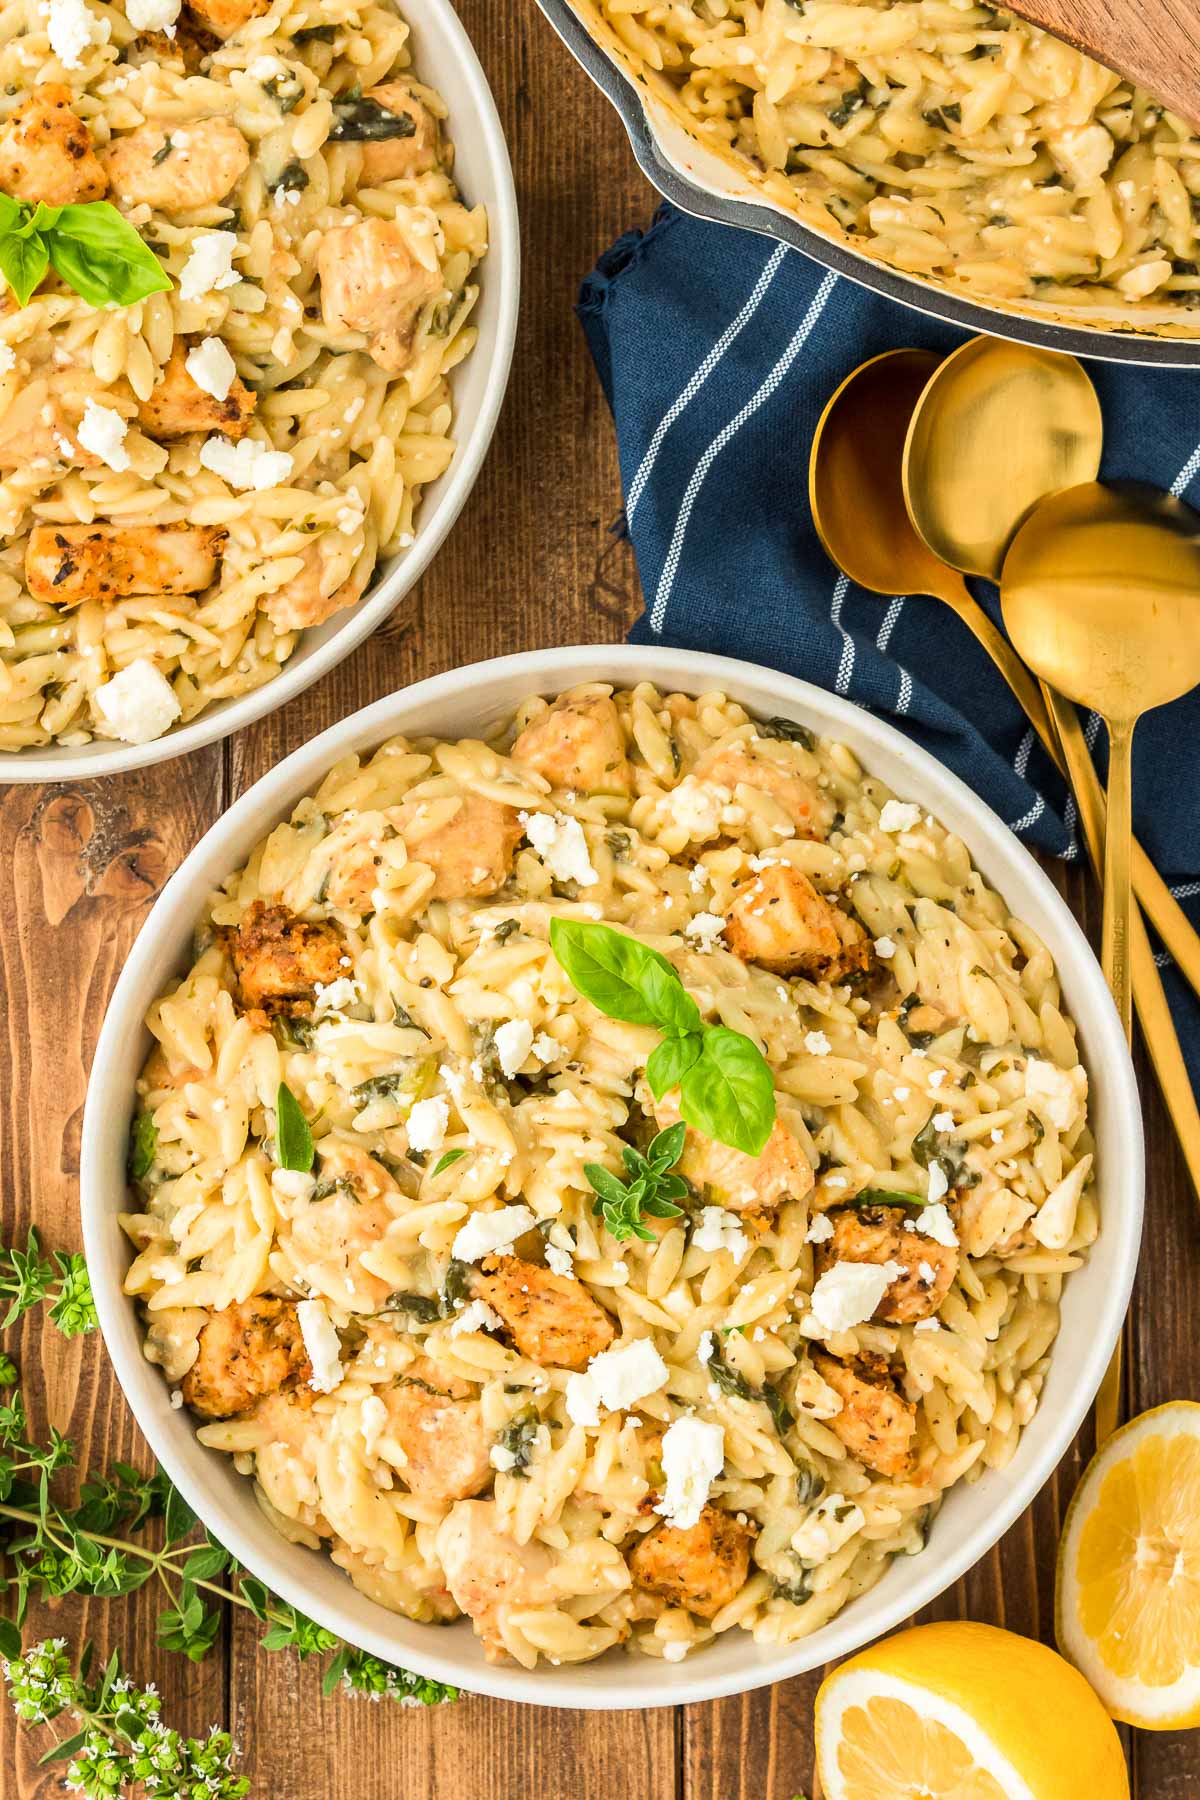 Lemon Chicken Orzo in a white bowl on a wooden table.